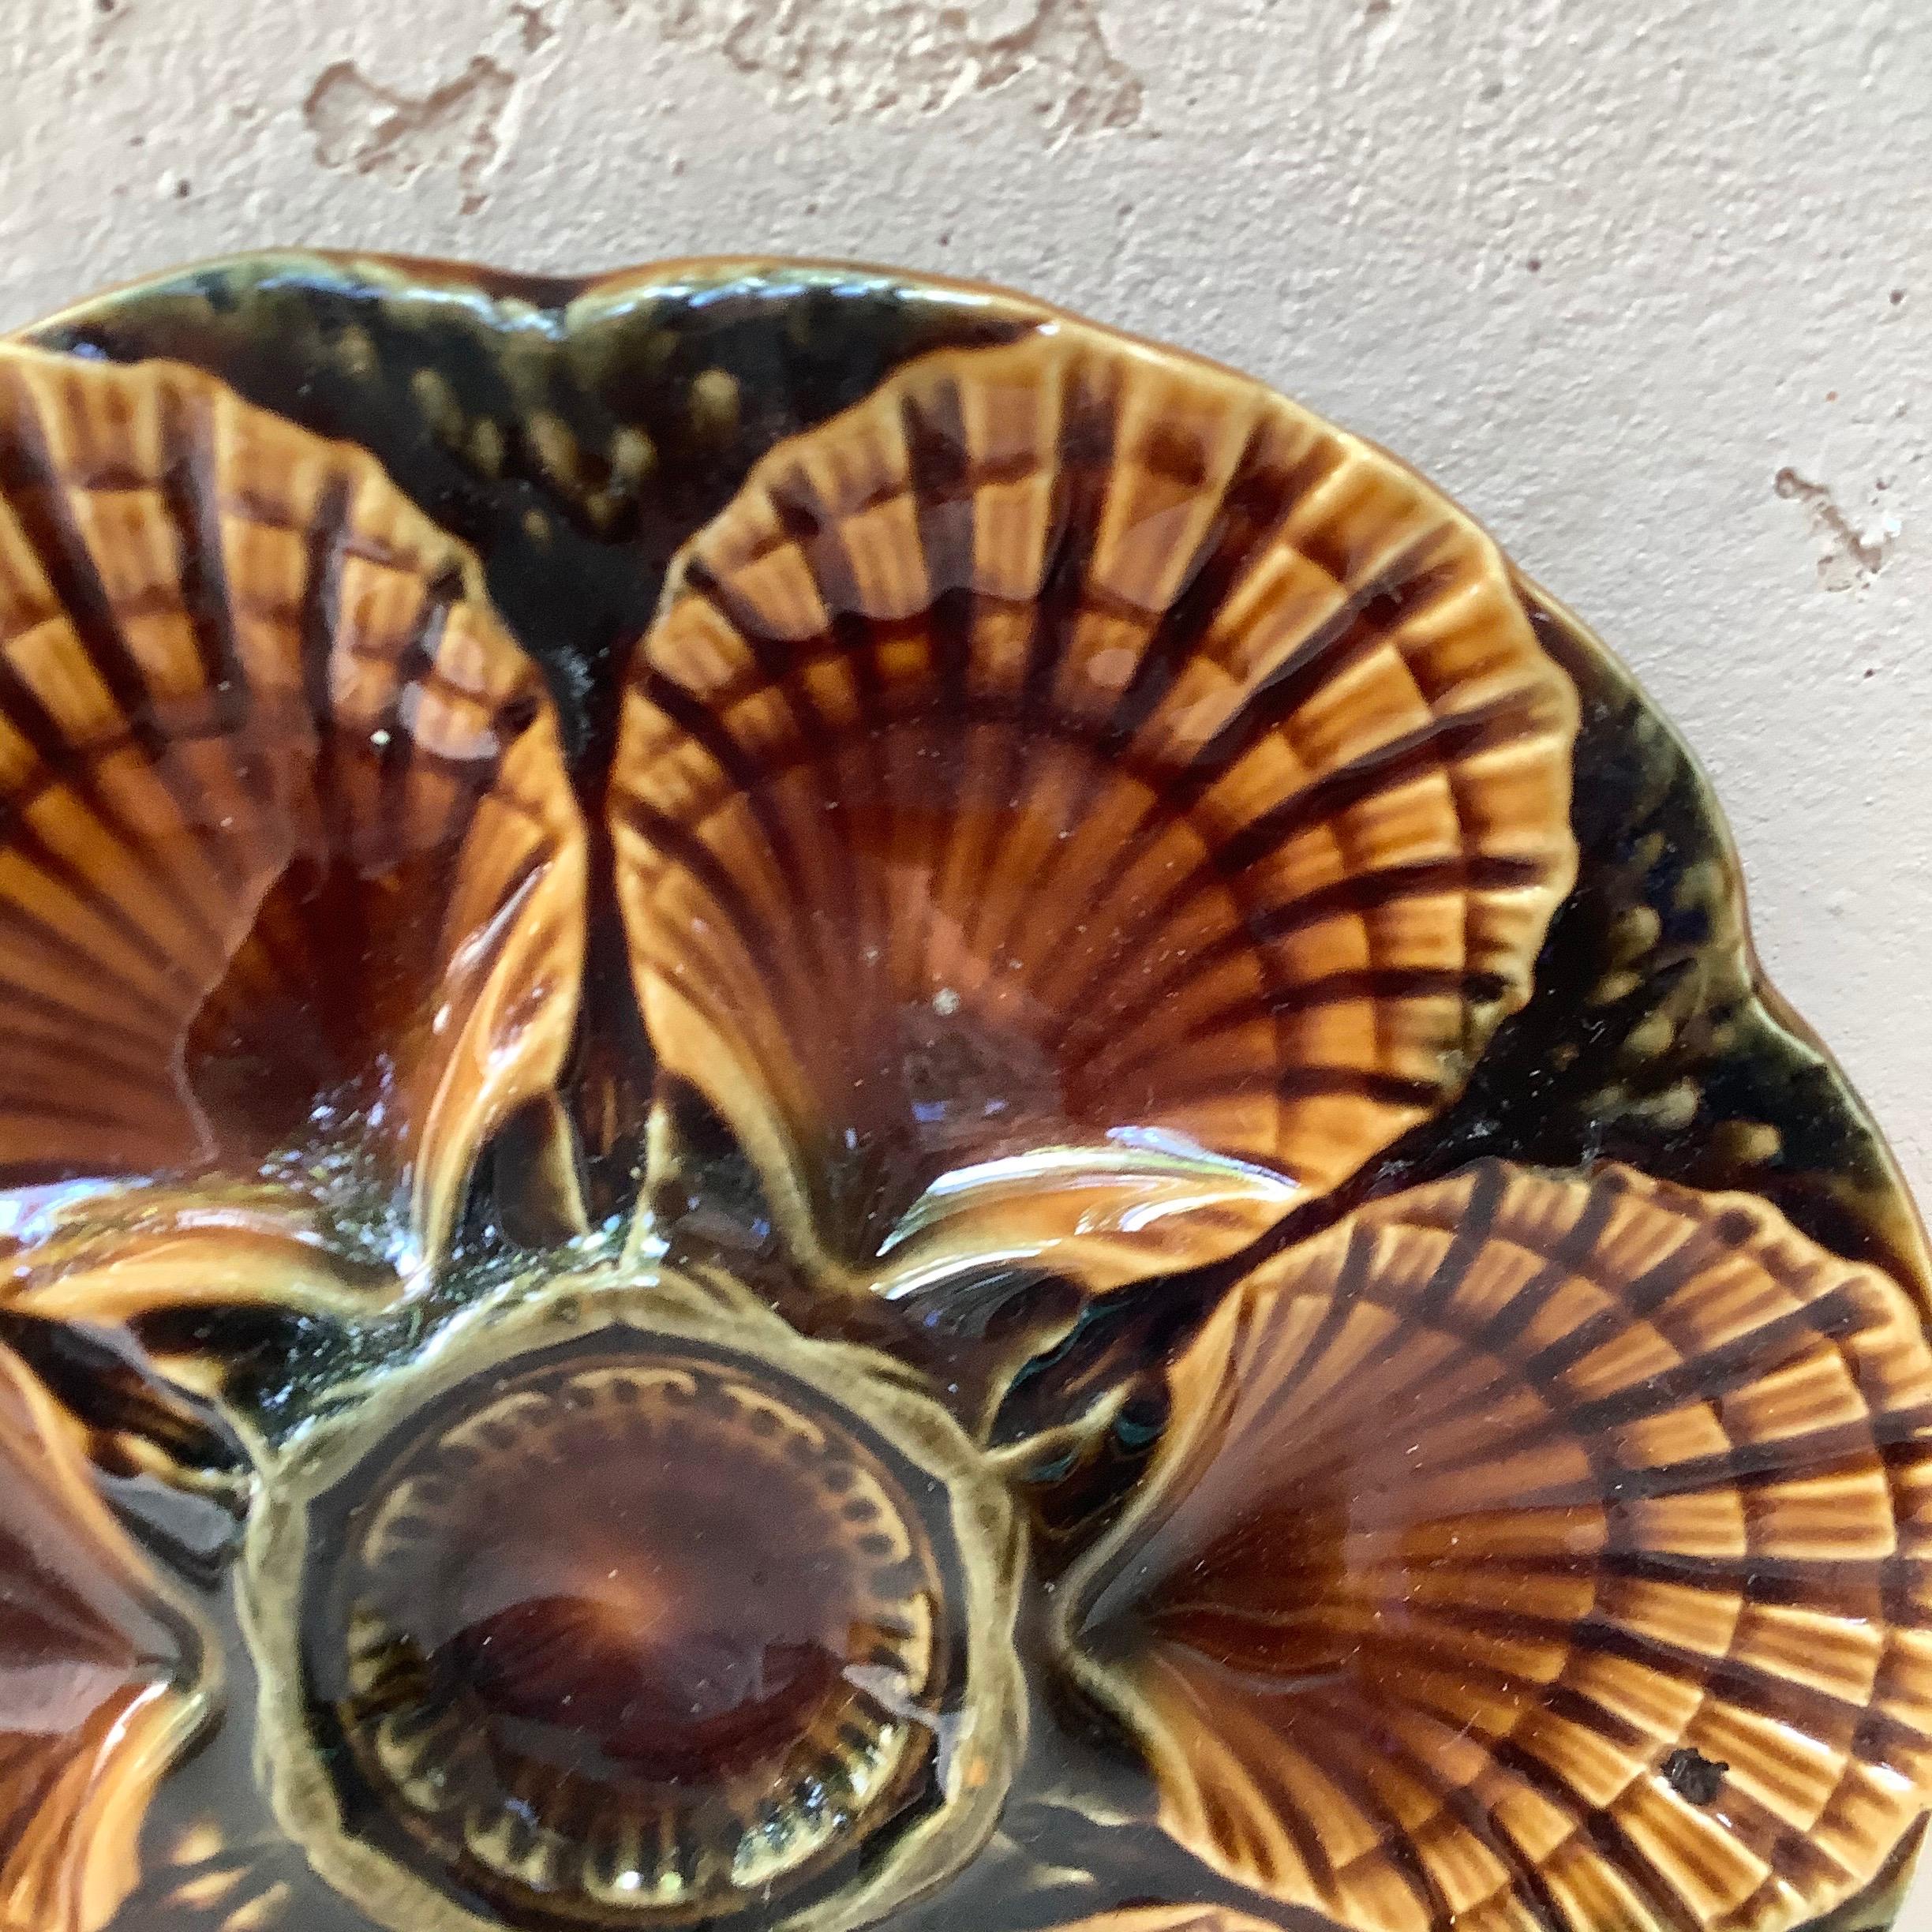 Majolica oyster plate signed Sarreguemines, circa 1950.
8 plates are available.